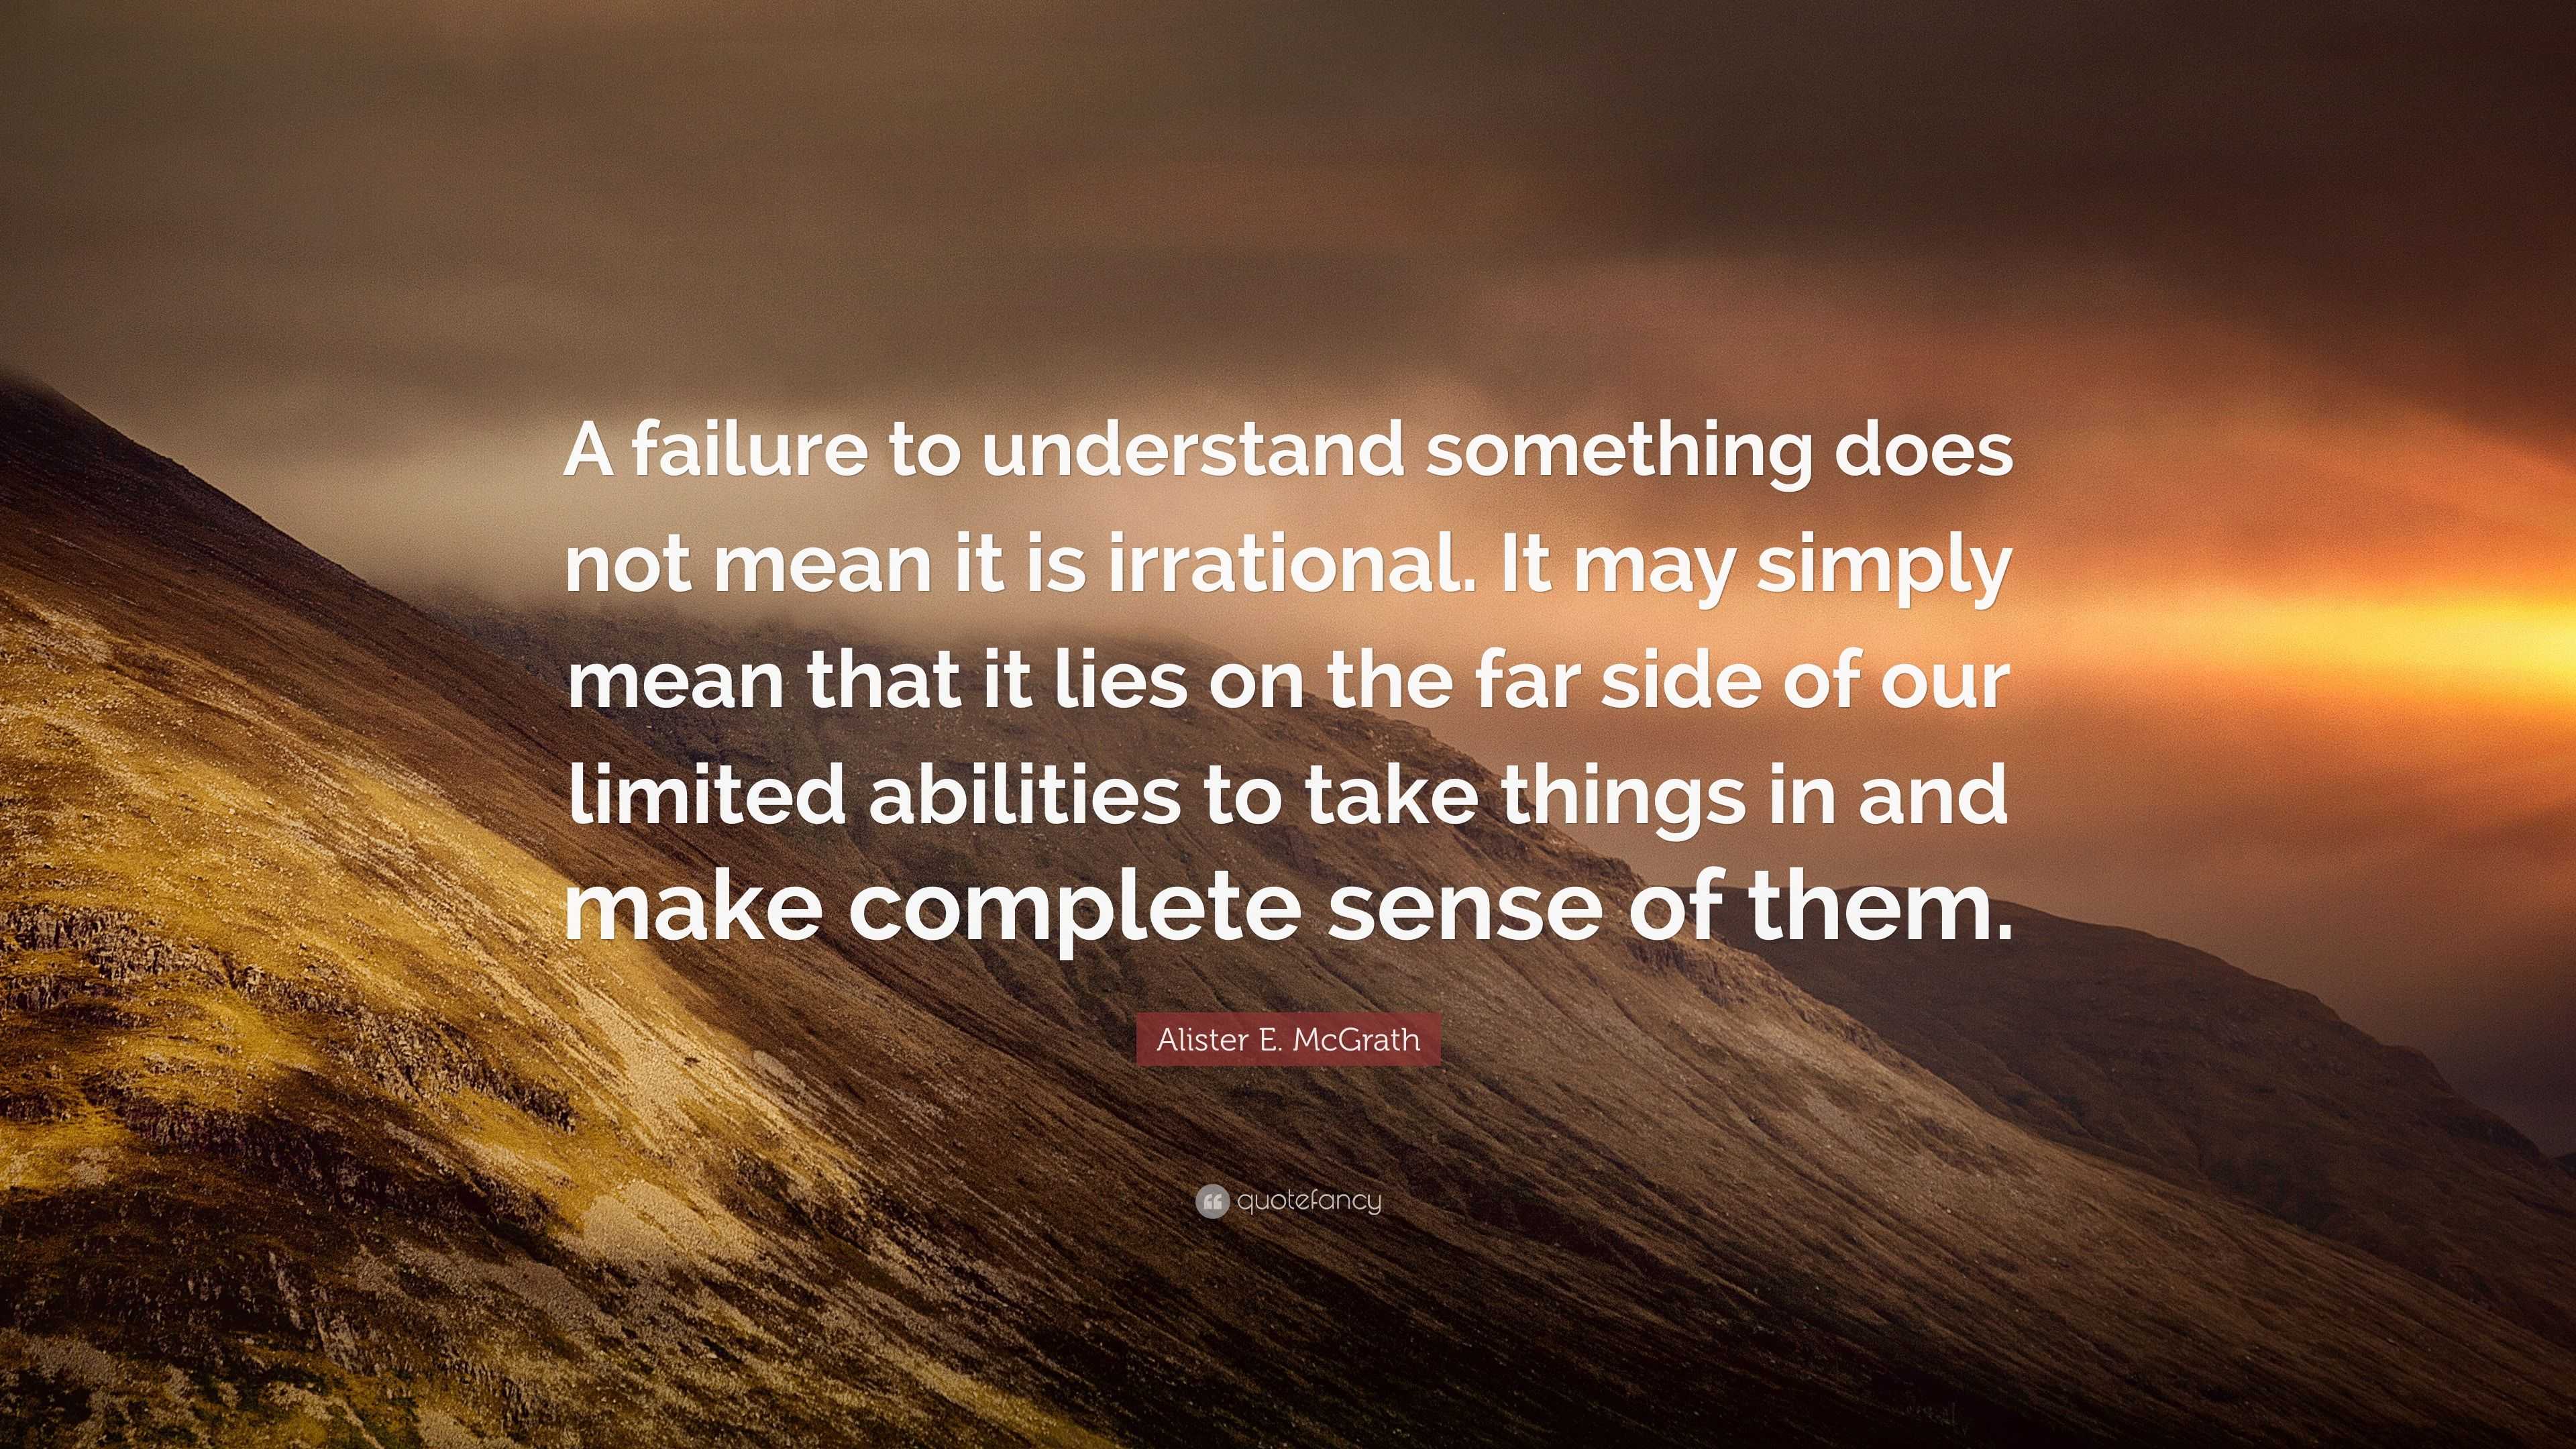 Alister E. McGrath Quote: “A failure to understand something does not ...